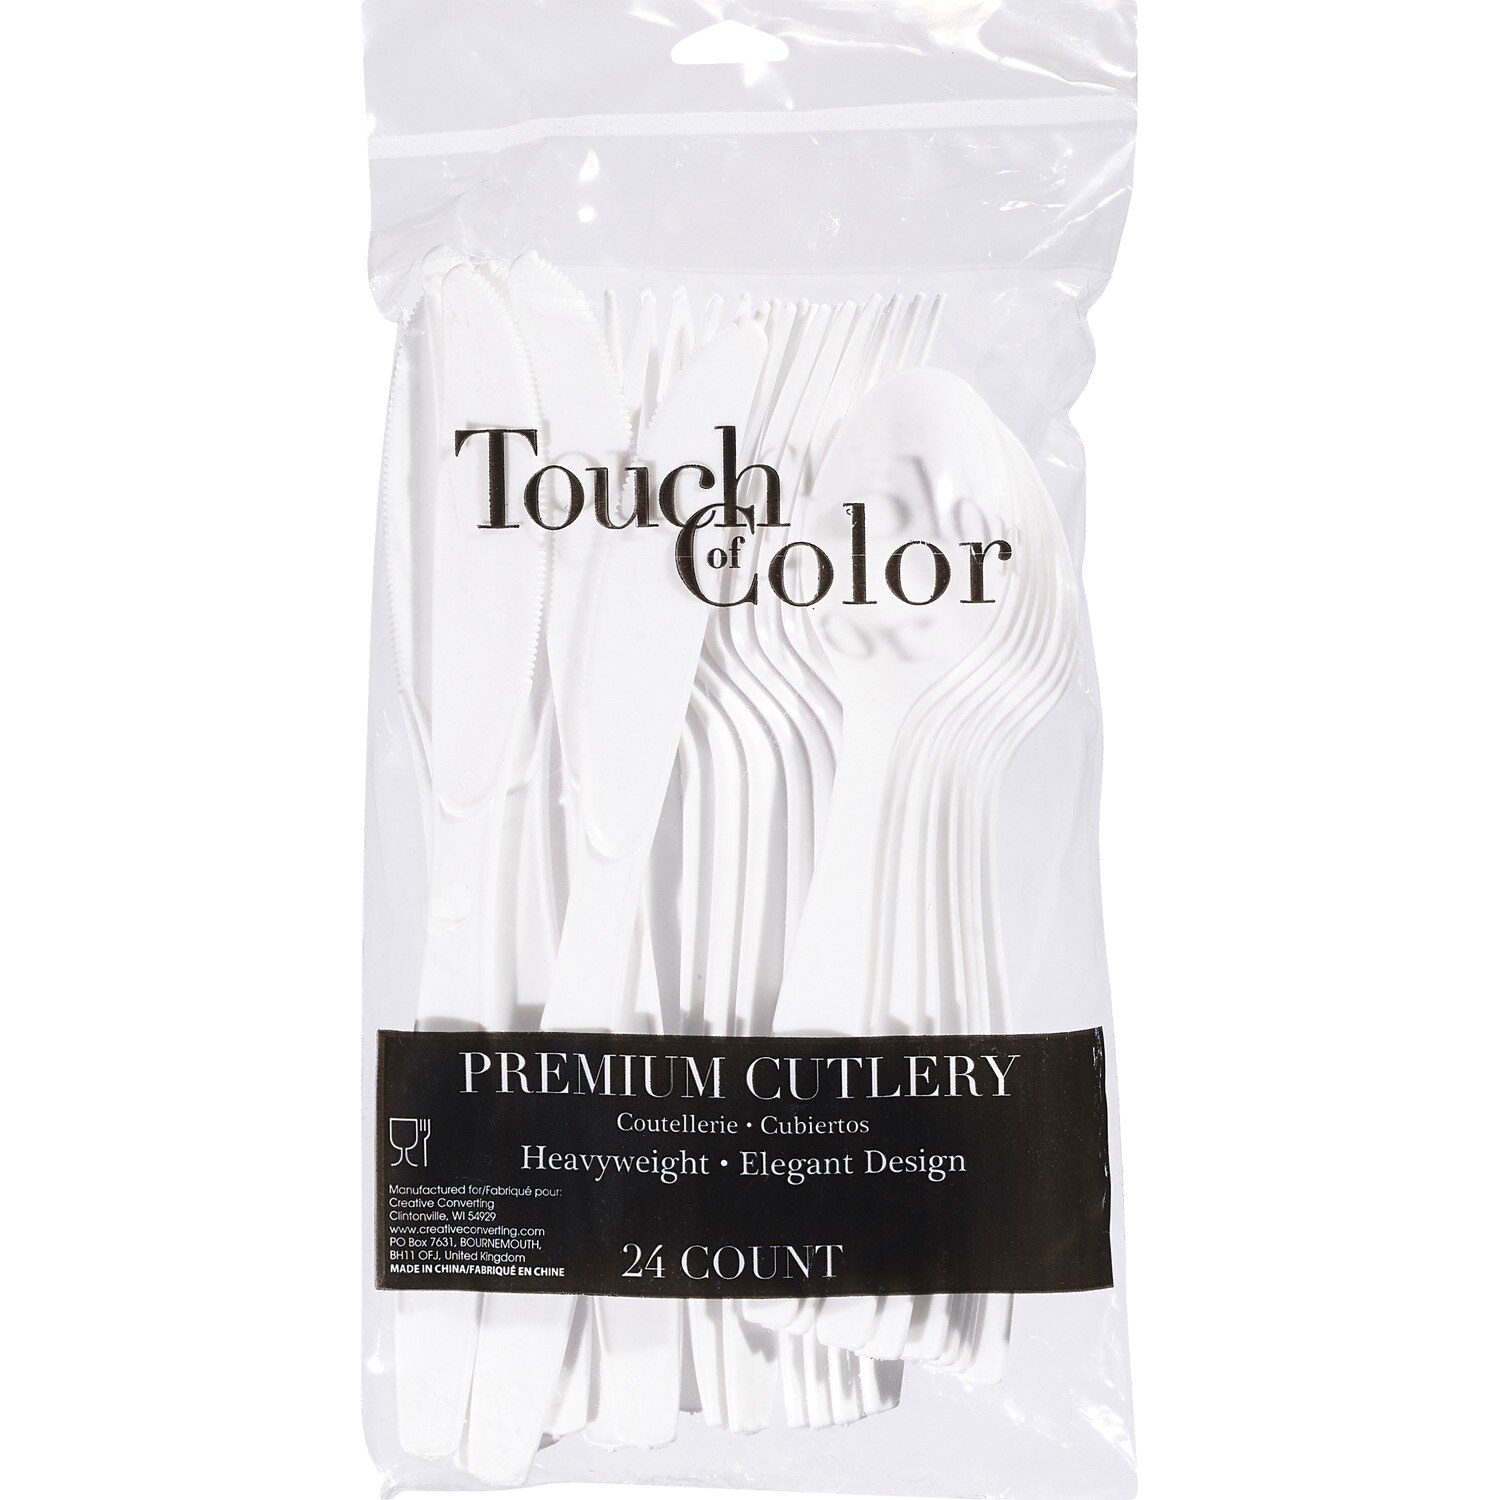 Touch of Color Premium Cutlery, White